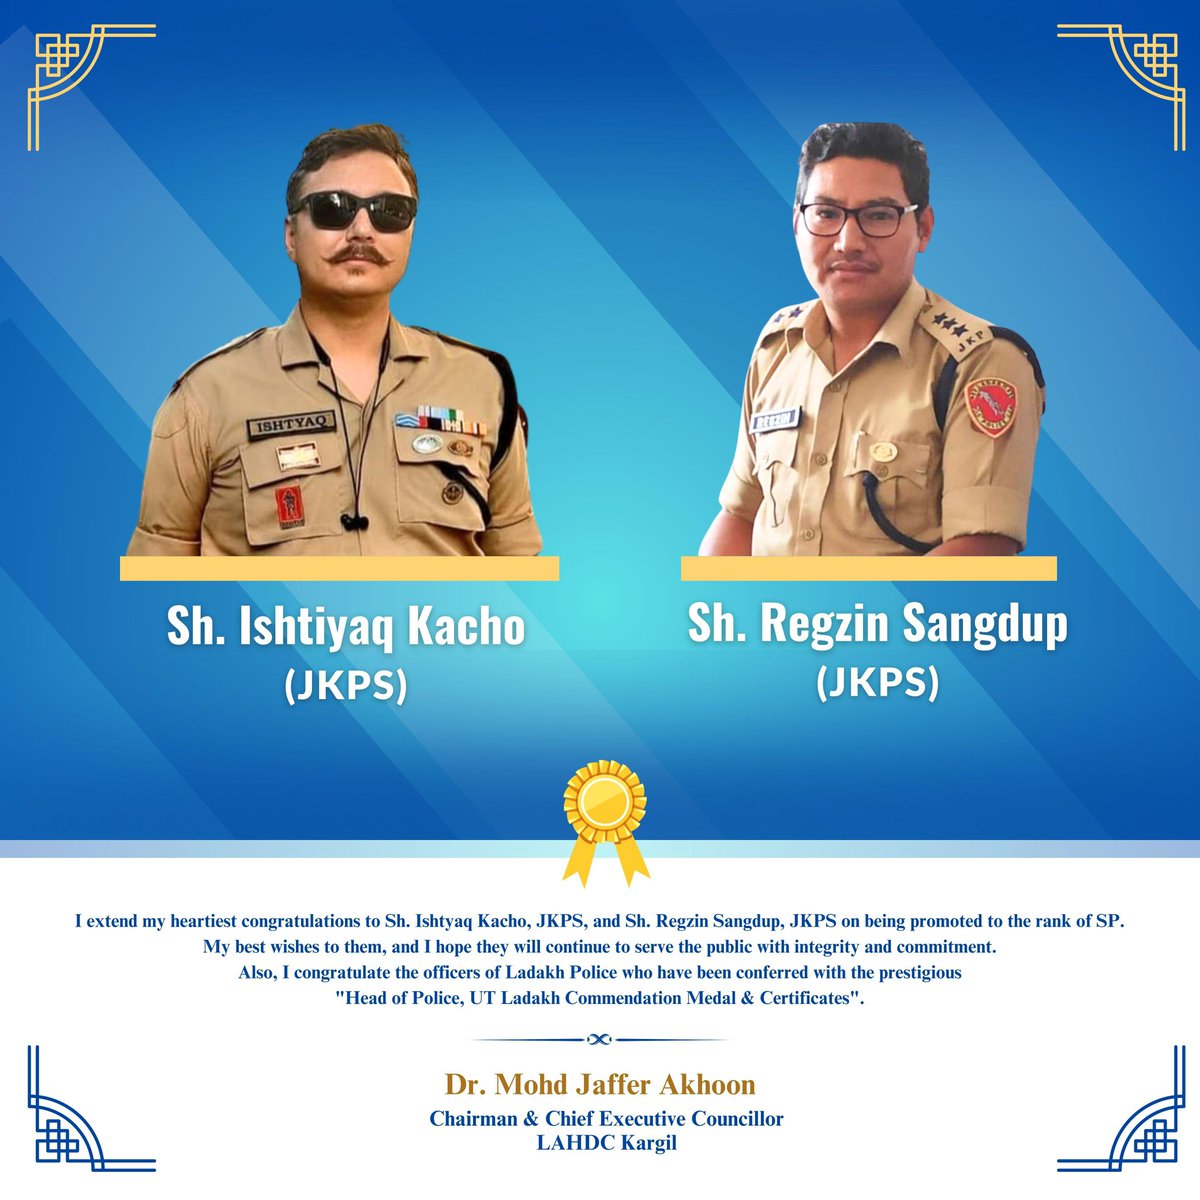 I extend my heartiest congratulations to Sh. Ishtyaq Kacho, JKPS, and Sh. Regzin Sangdup, JKPS on being promoted to the rank of SP. My best wishes to them, and I hope they will continue to serve the public with integrity and commitment.